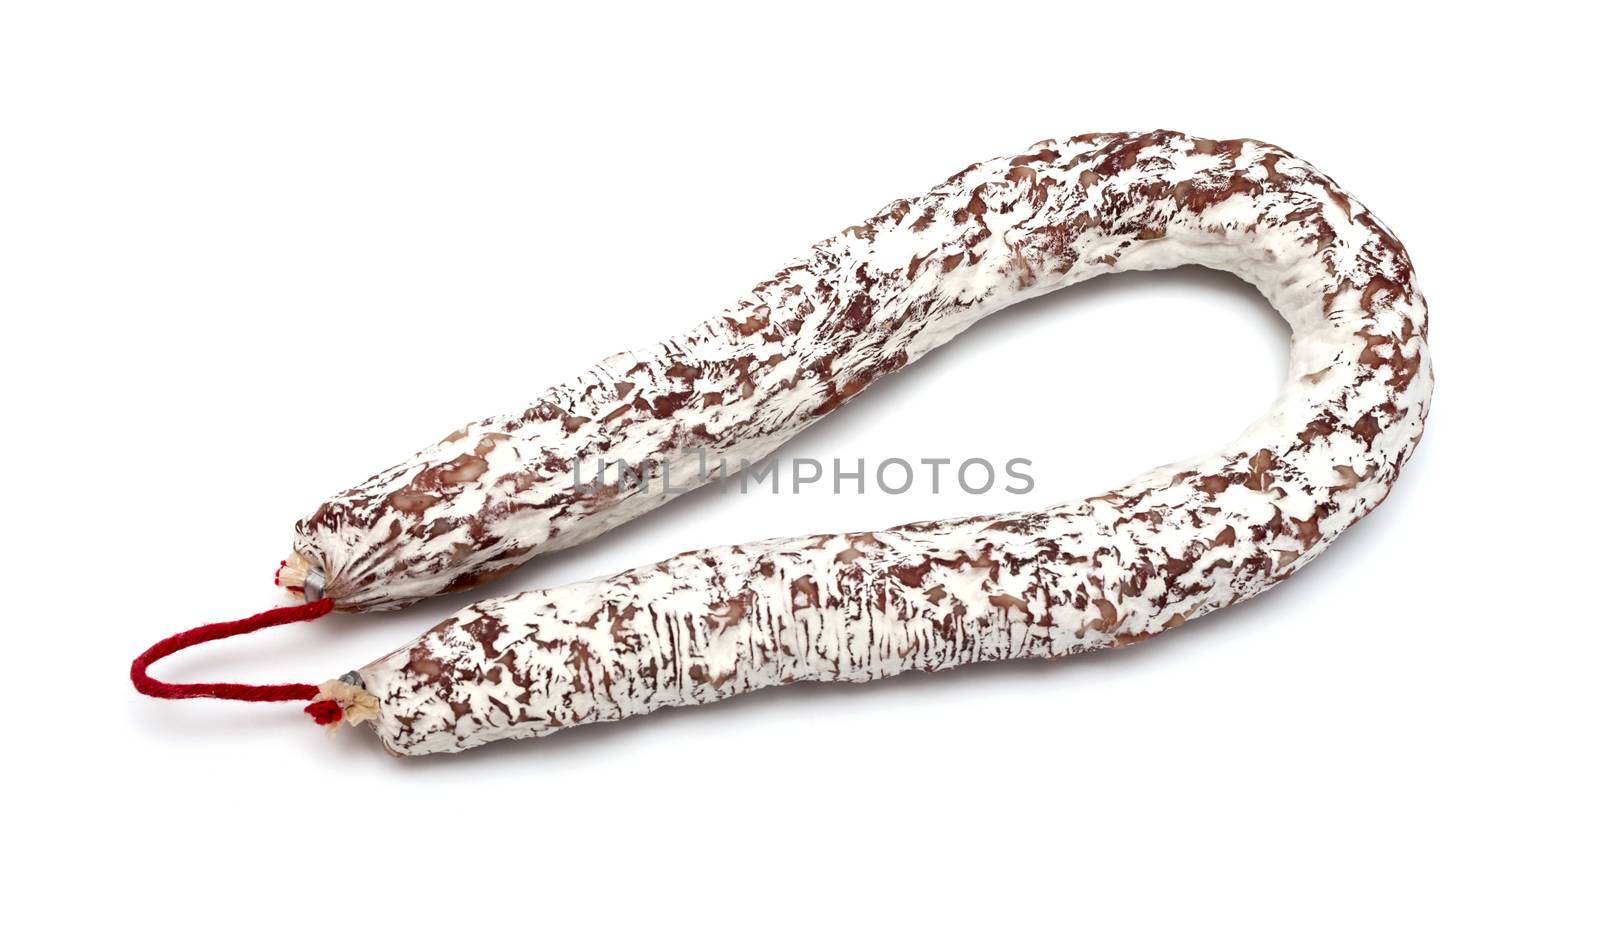 Ring of sausage isolated on a white background